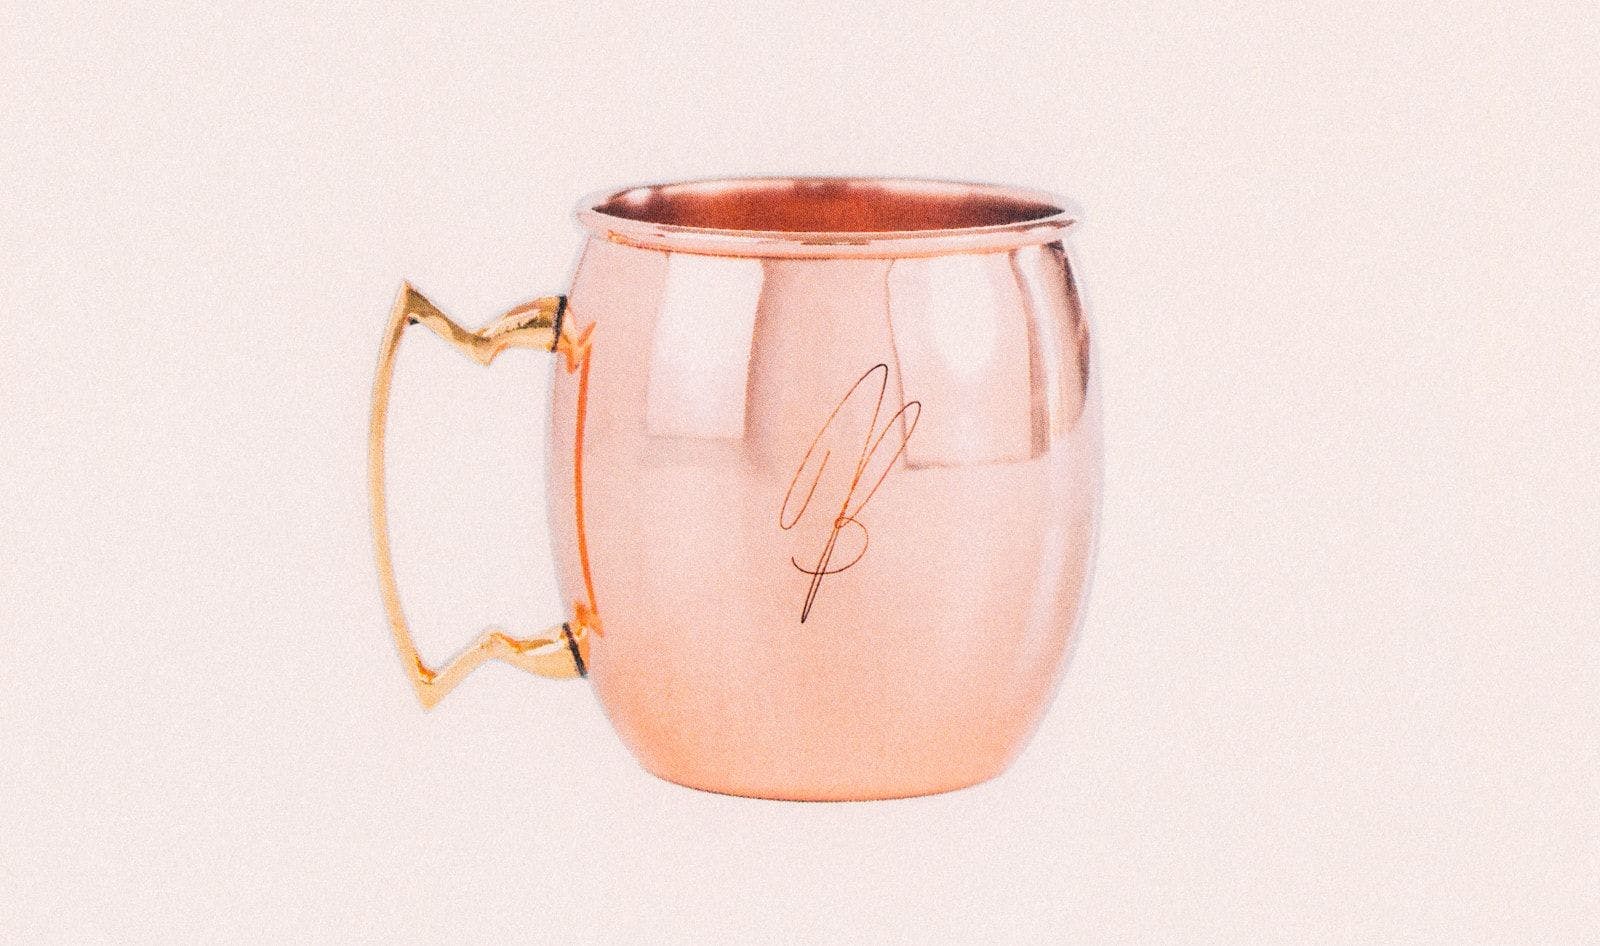 Moscow mule cup with the letter B